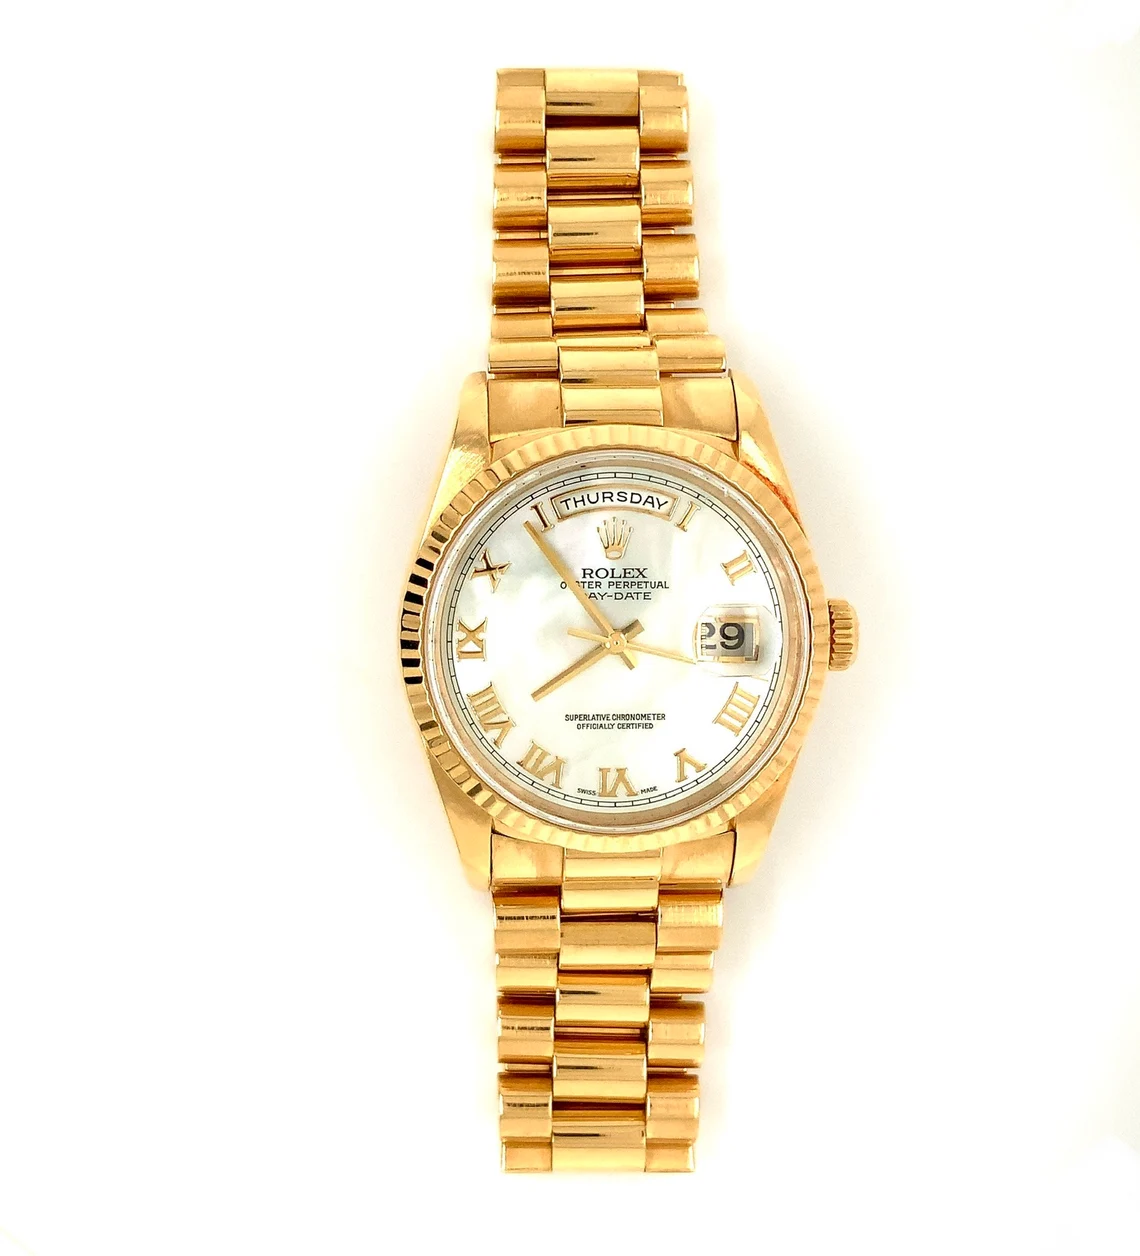 circa 2000 gents rolex oyster perpetual watch